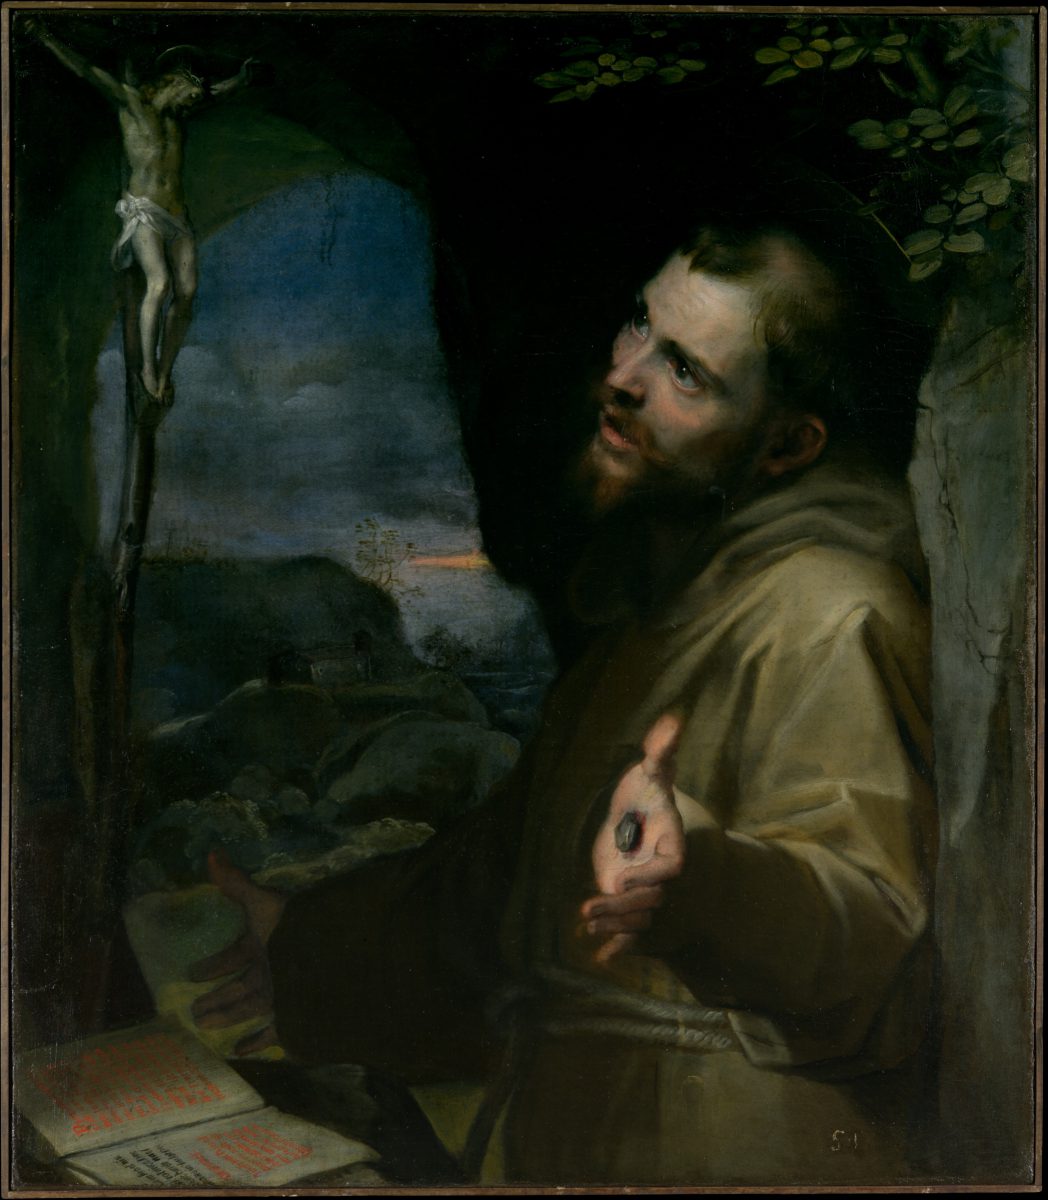 St_Francis_MET_museum_wikimedia_Commons